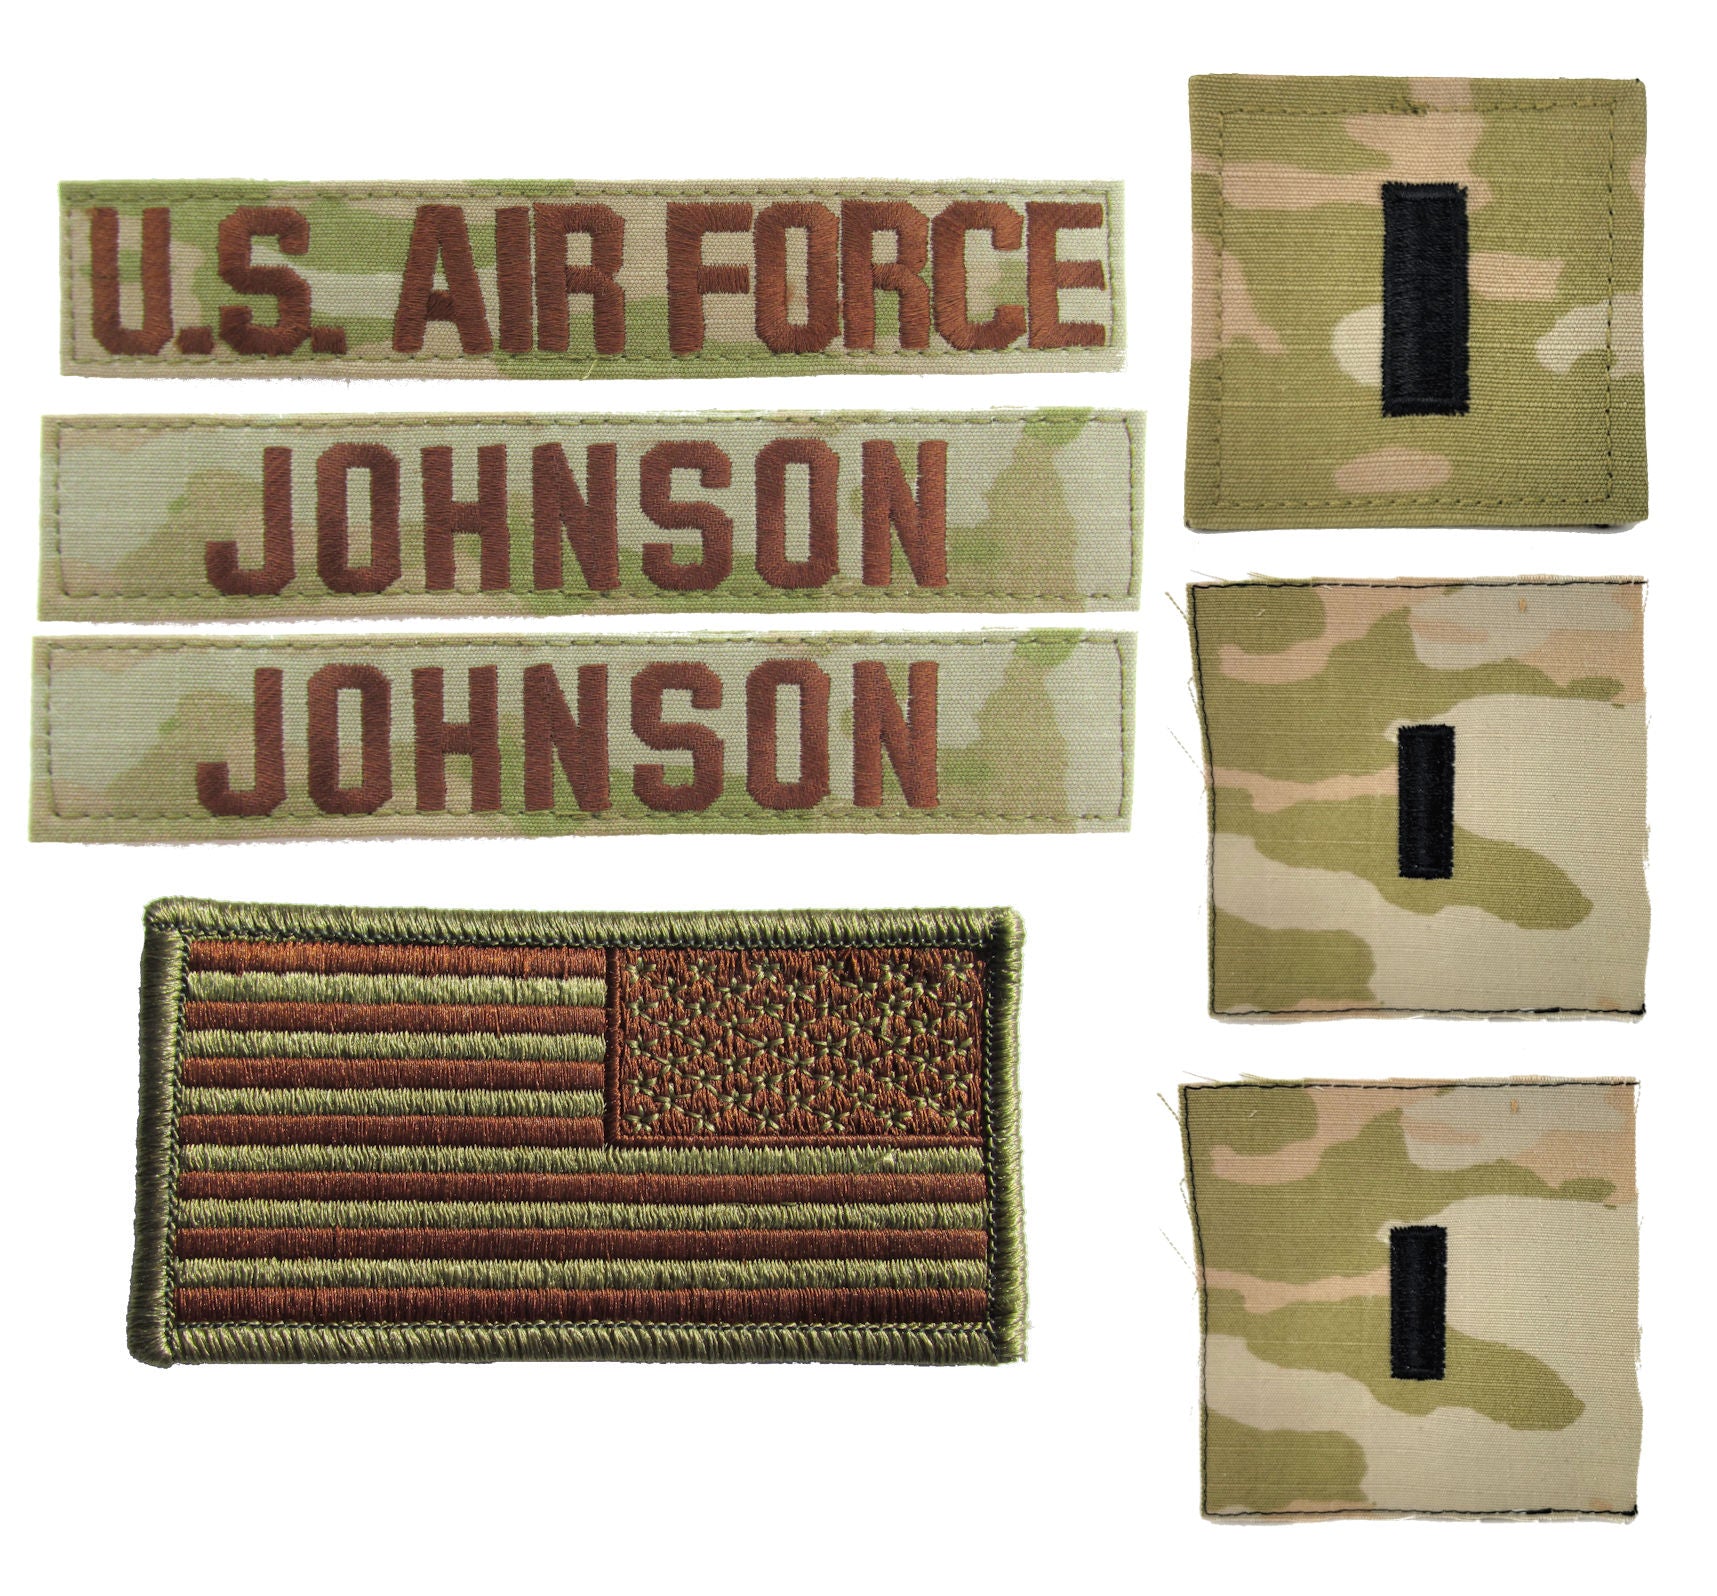 Air Force OCP Name Tape and Rank - 3 Color OCP Package Deal